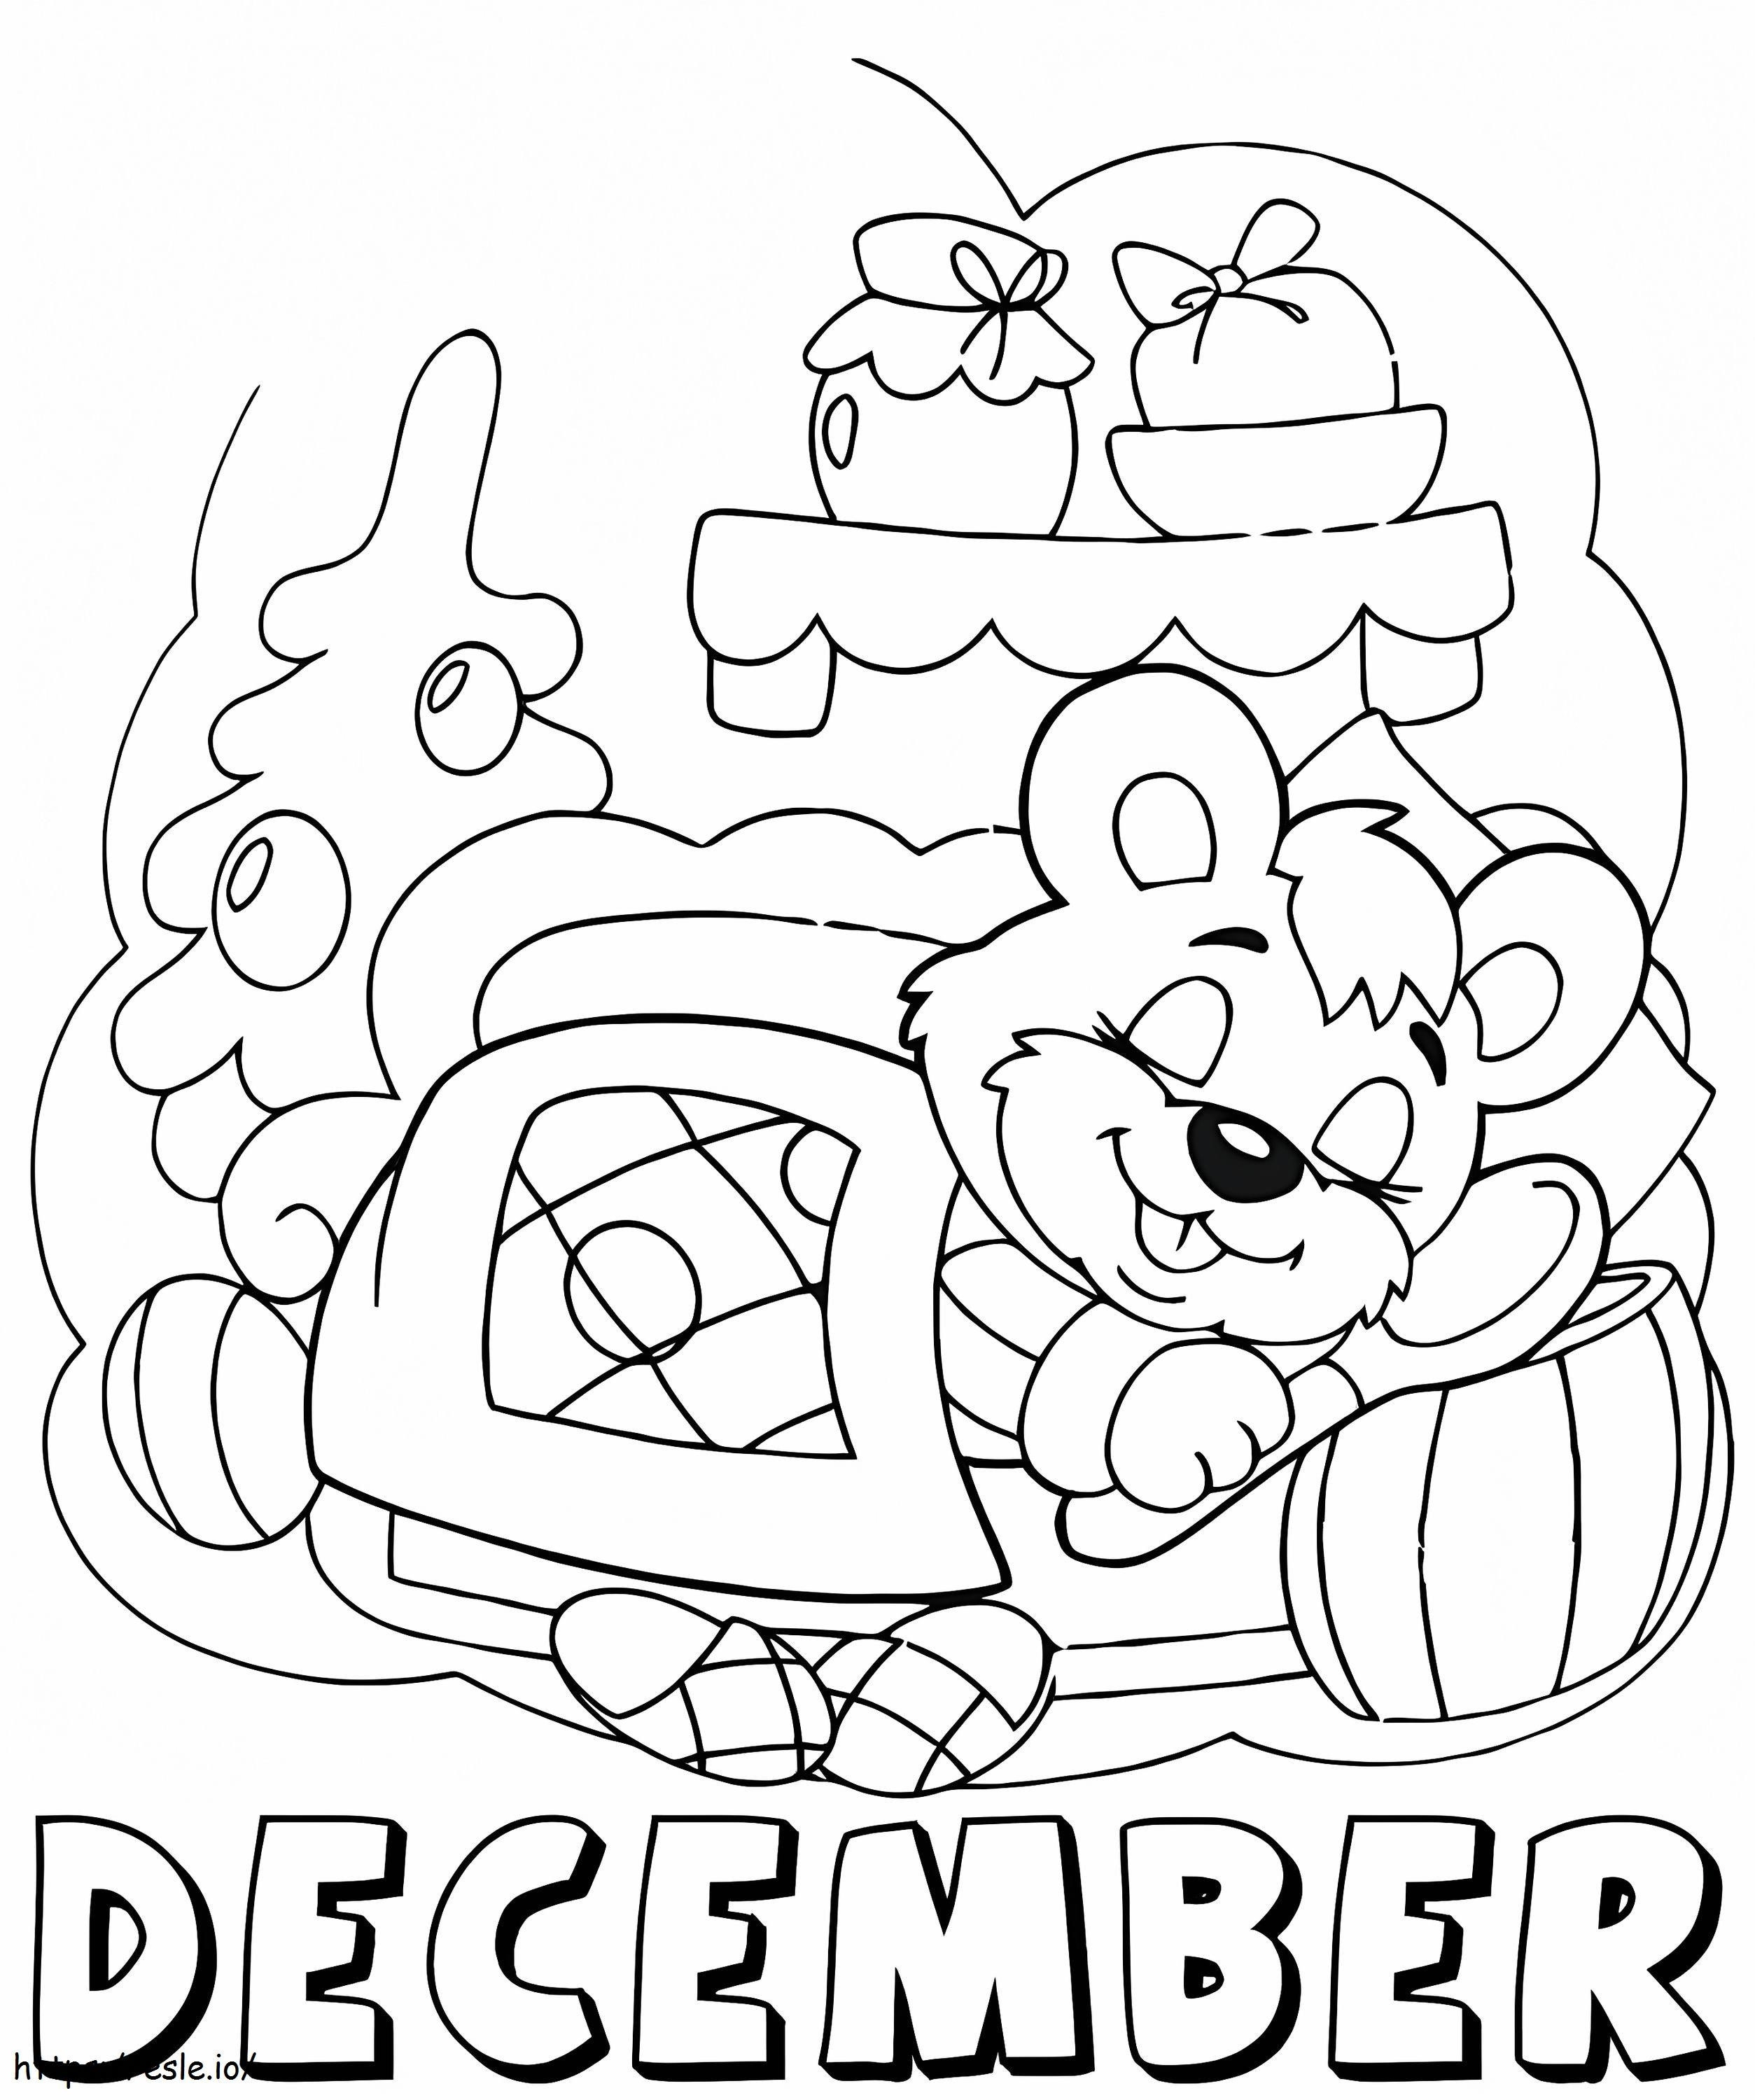 December 8 coloring page